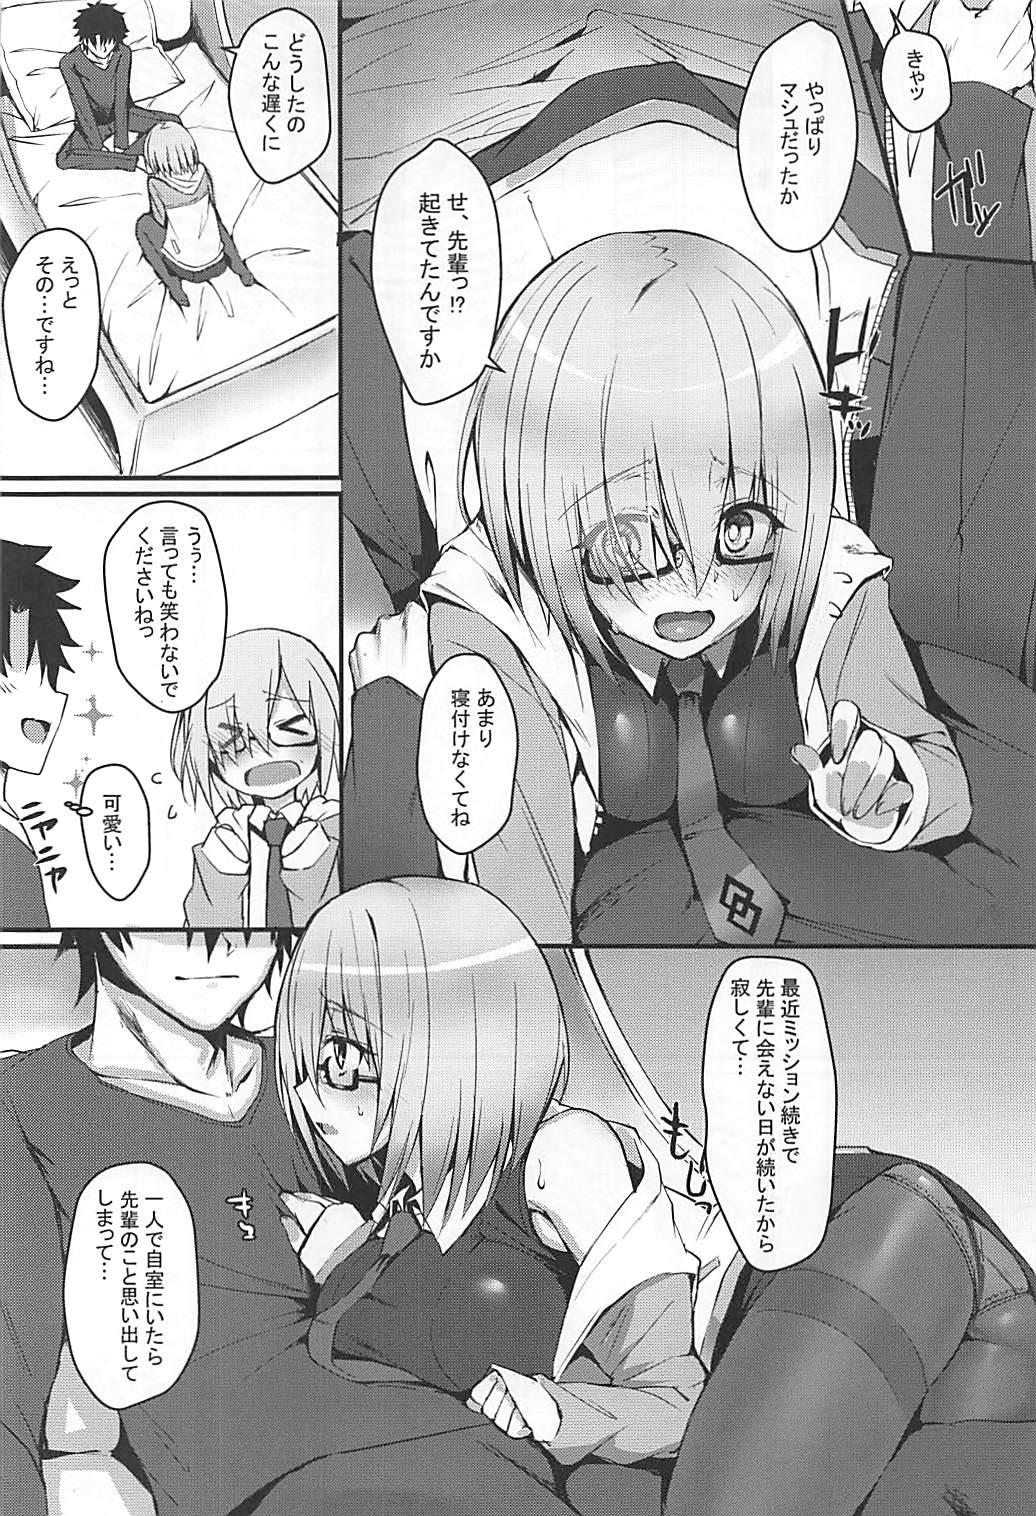 Asians MDS - Fate grand order Anime - Page 3